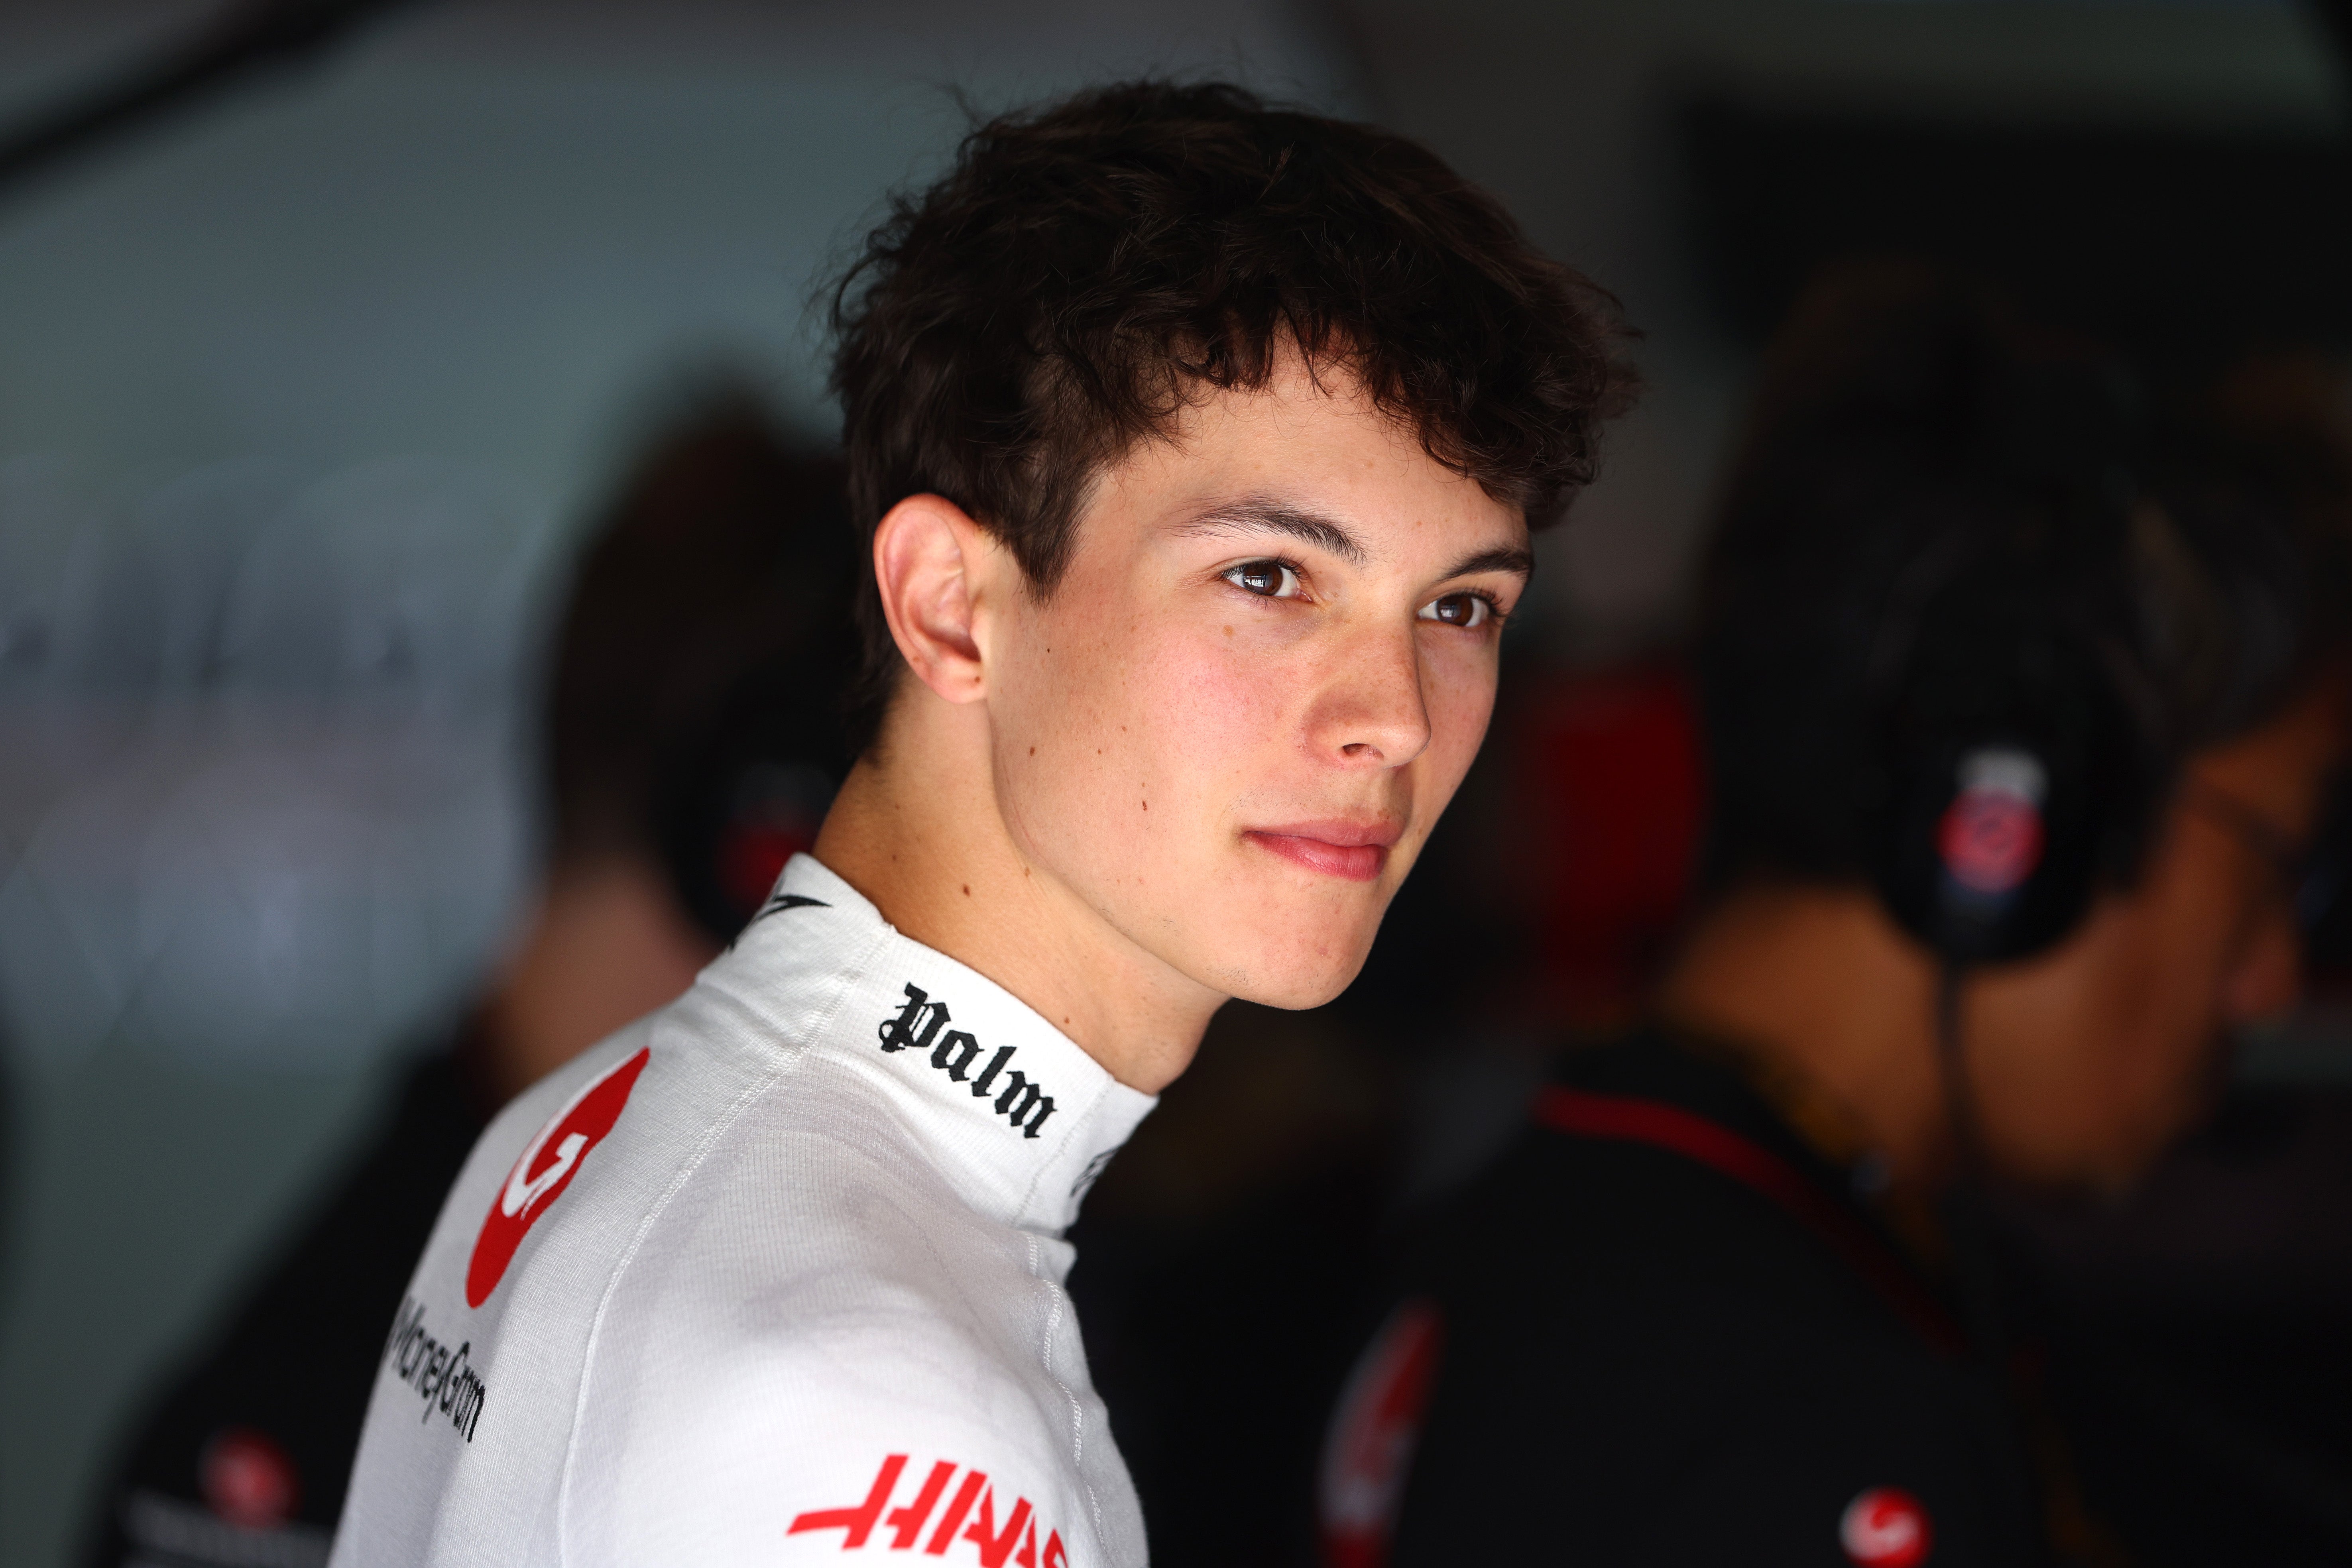 Ollie Bearman will race for Haas in Formula 1 next year